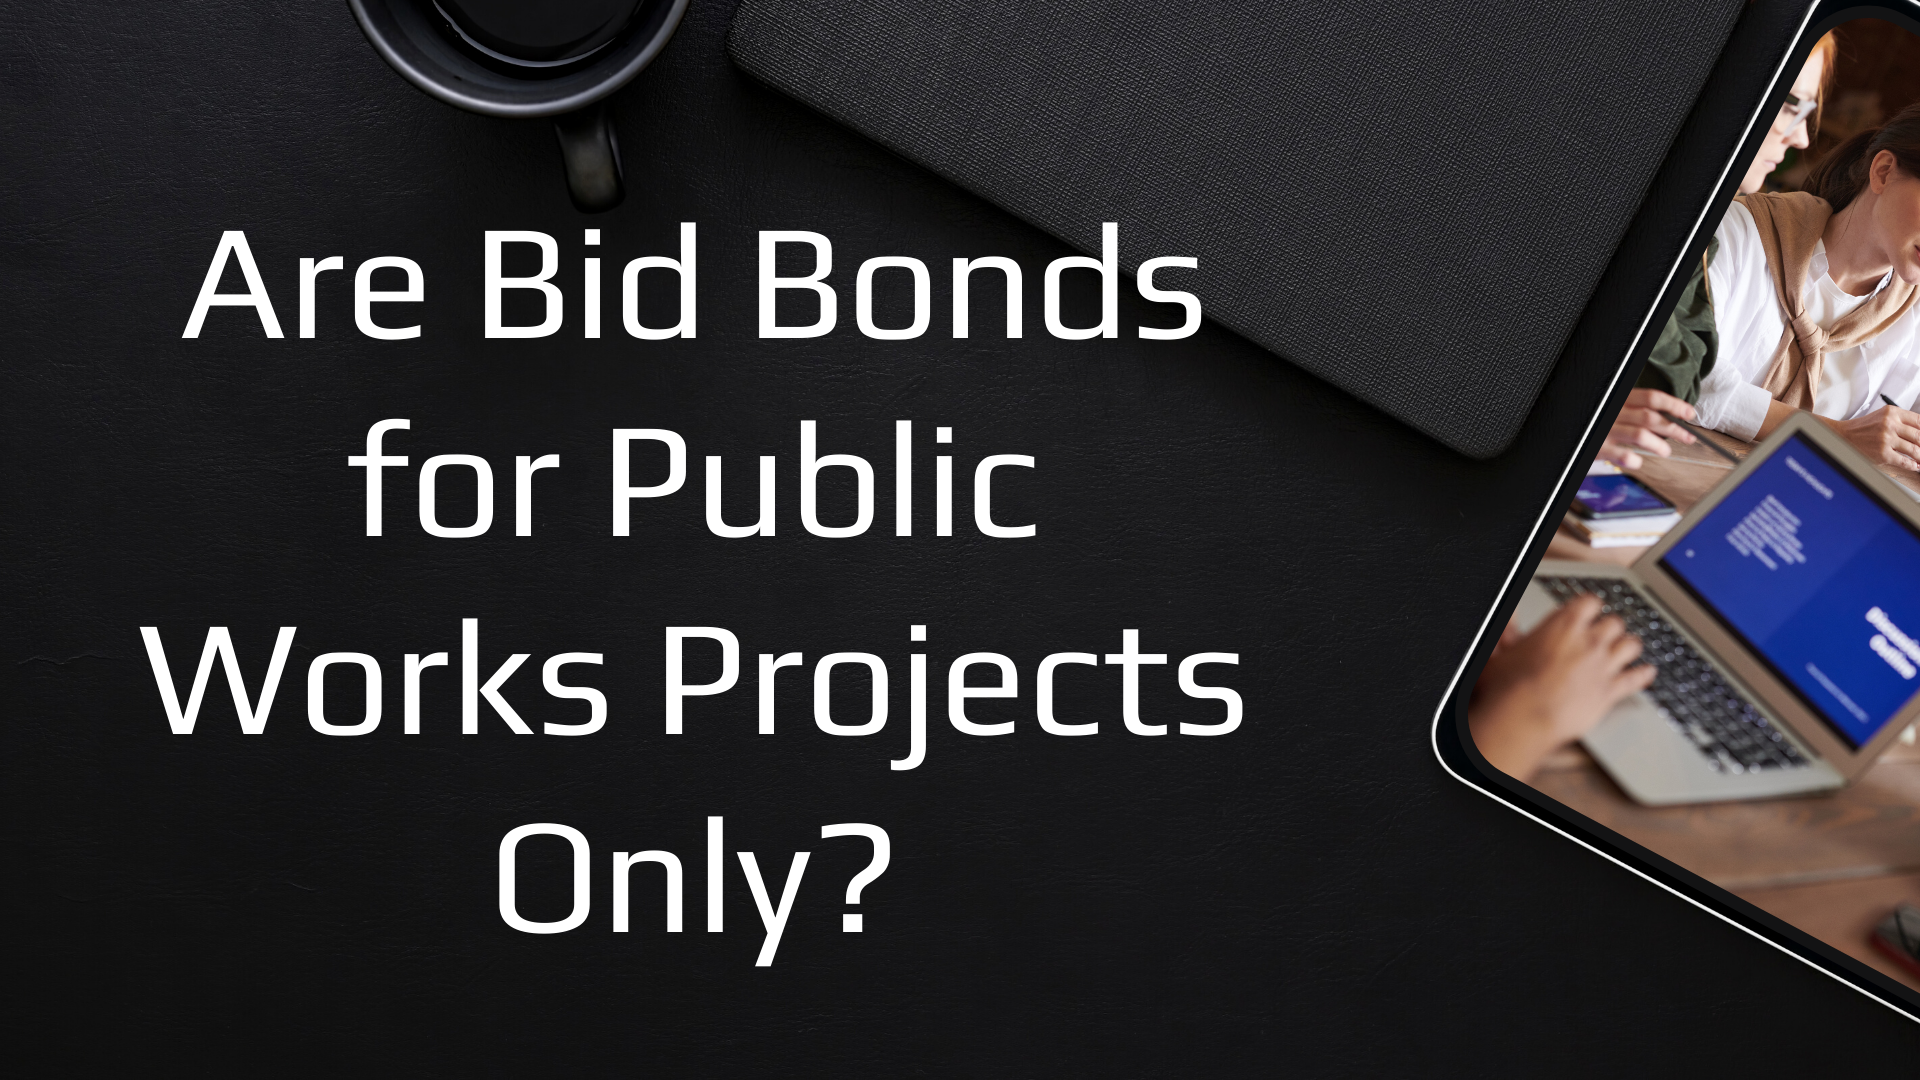 bid bond - Is a bid bond required for public works projects - workspace